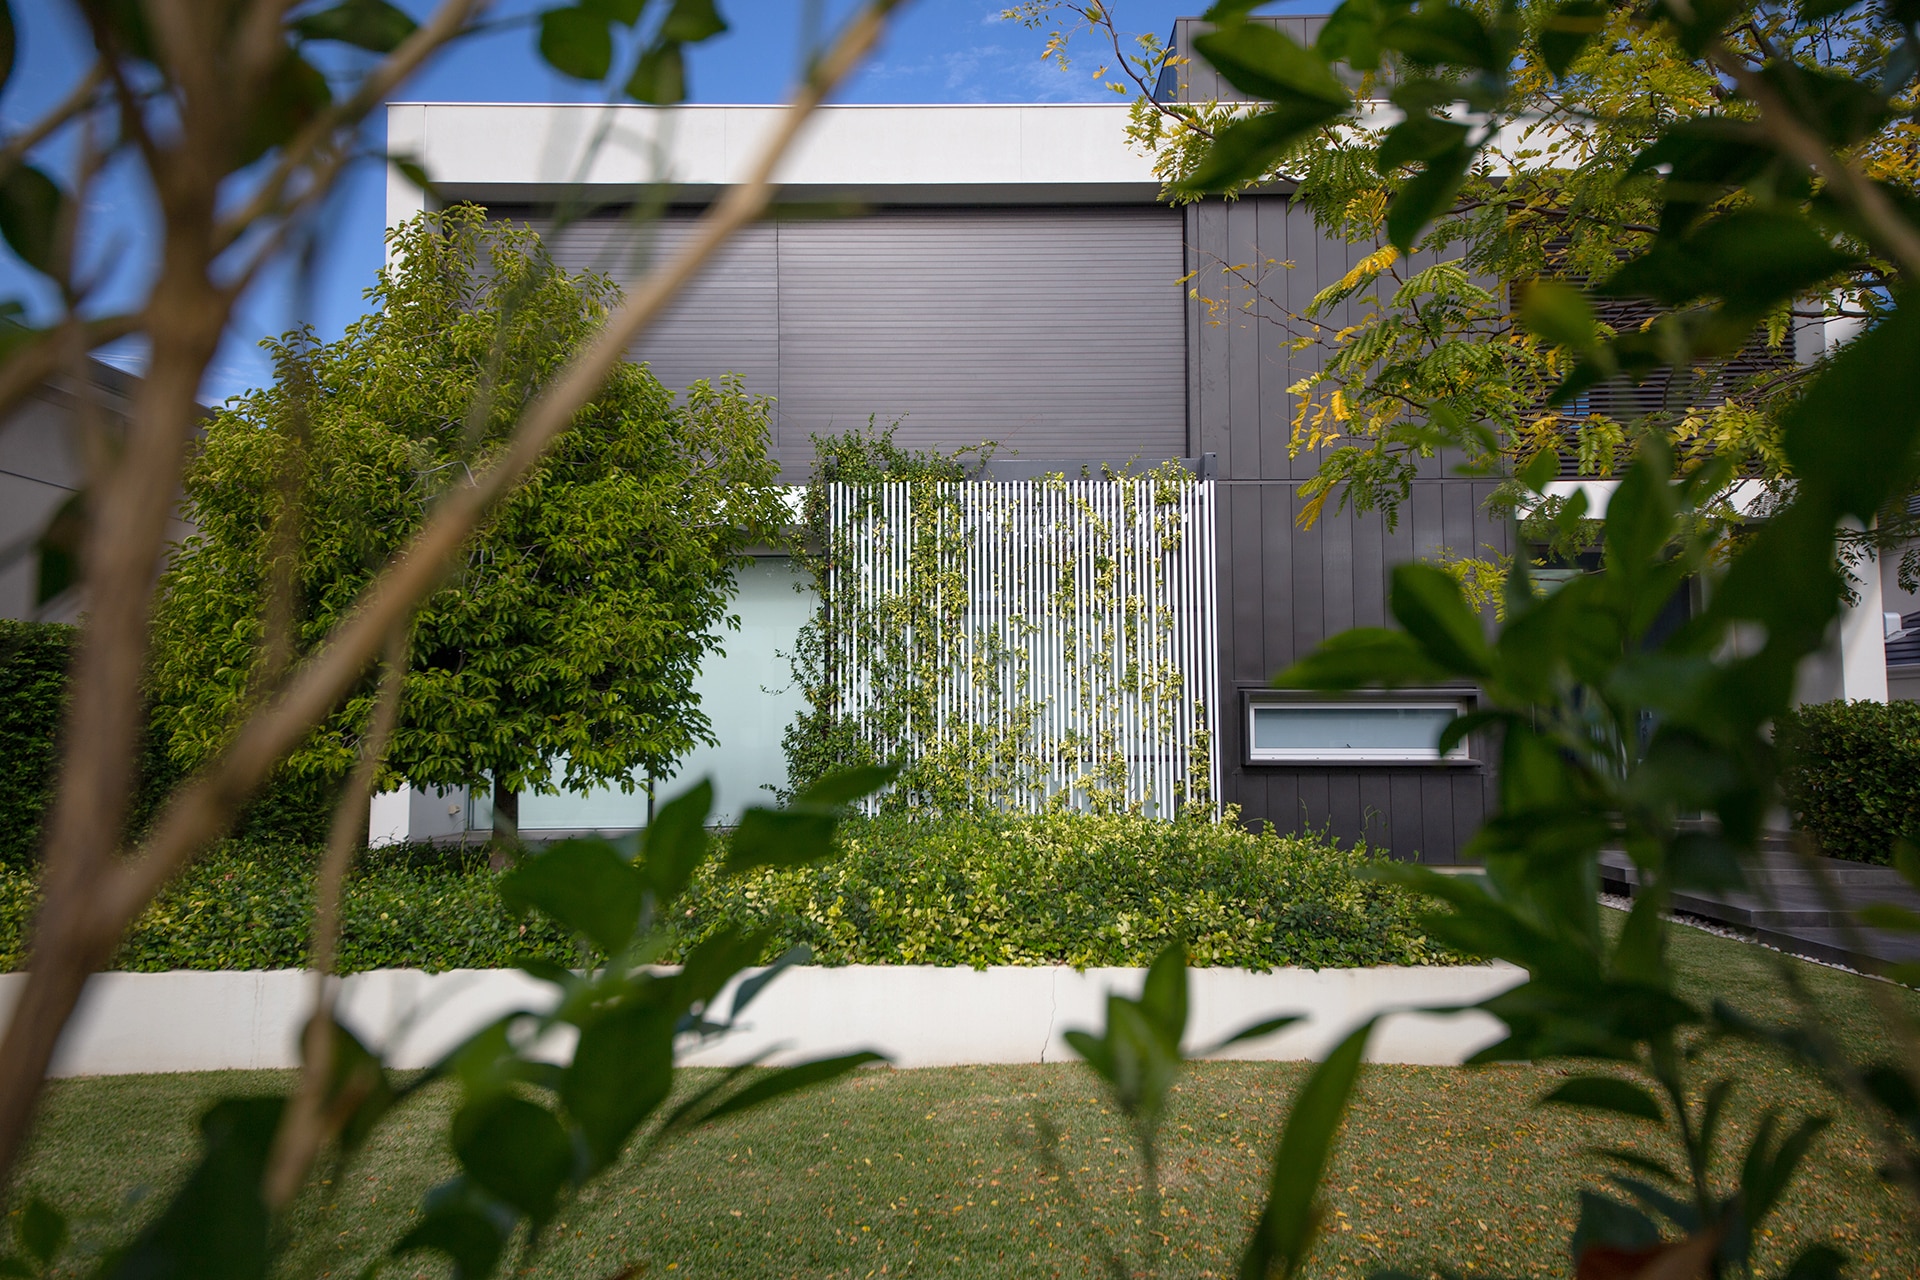 A photograph of a contemporary home and garden through the leaves, the garden has matured and is climbing up a trellis structure in the home.